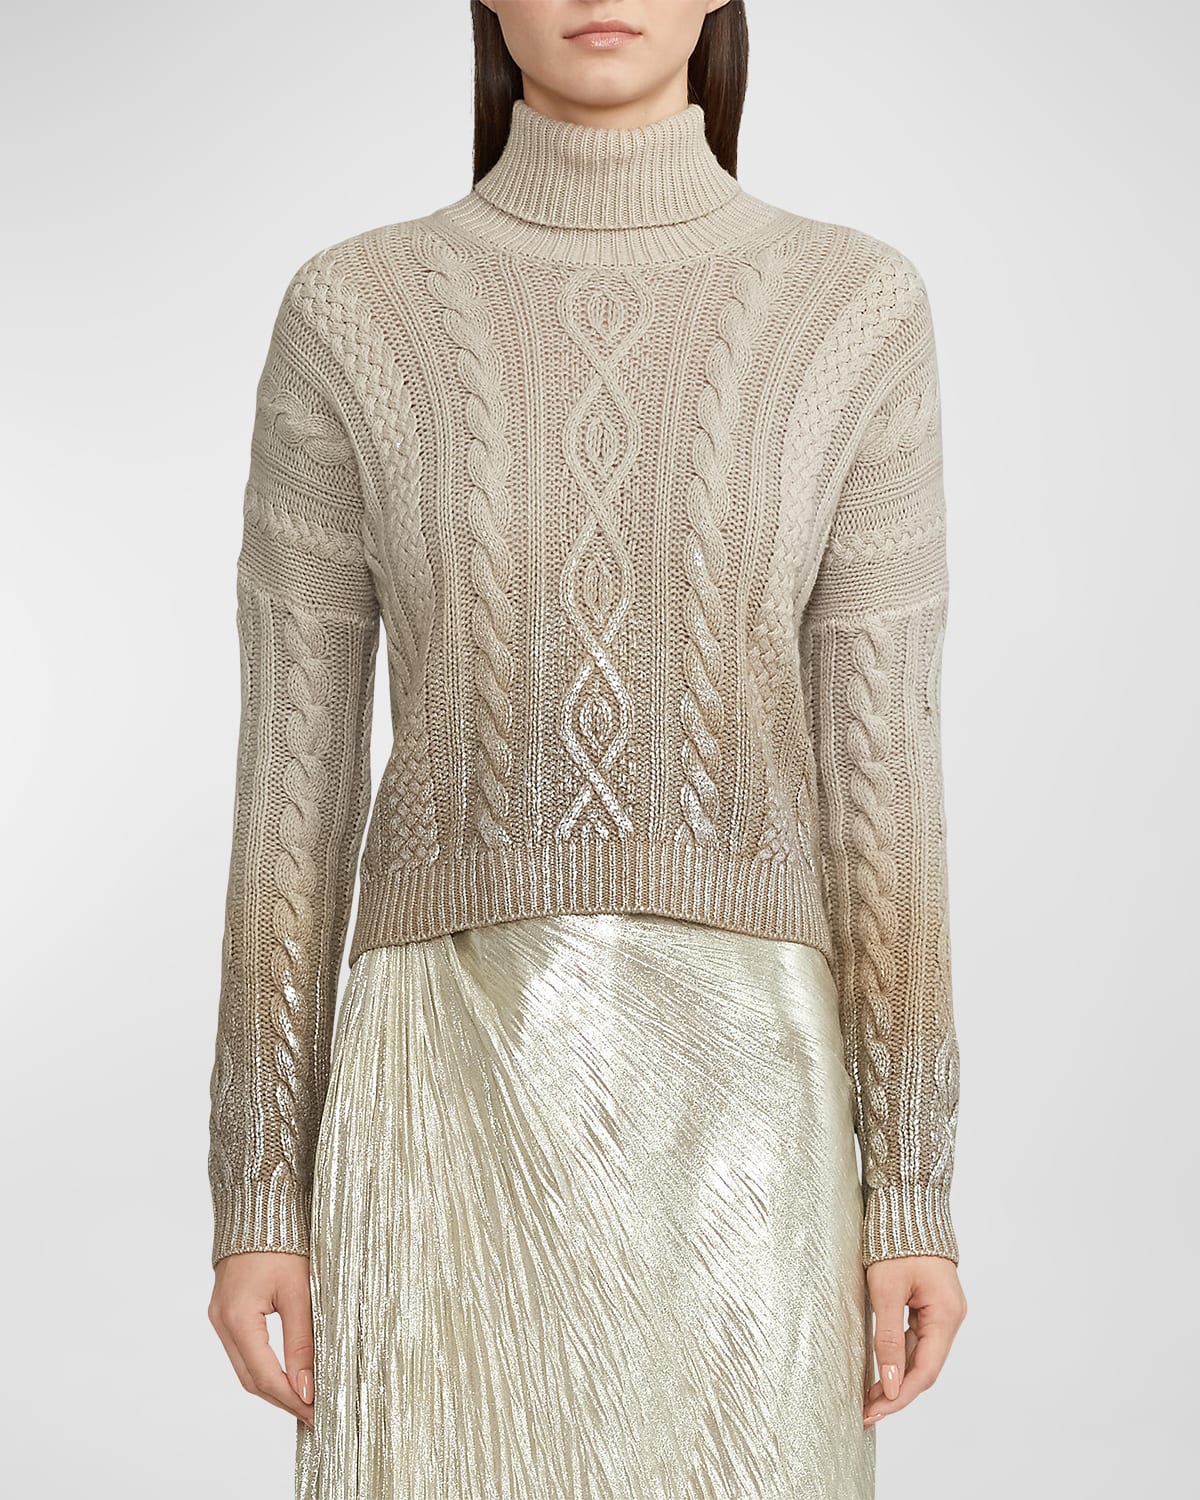 Cashmere Turtleneck Sweater with Artisanal Handpainted Detail